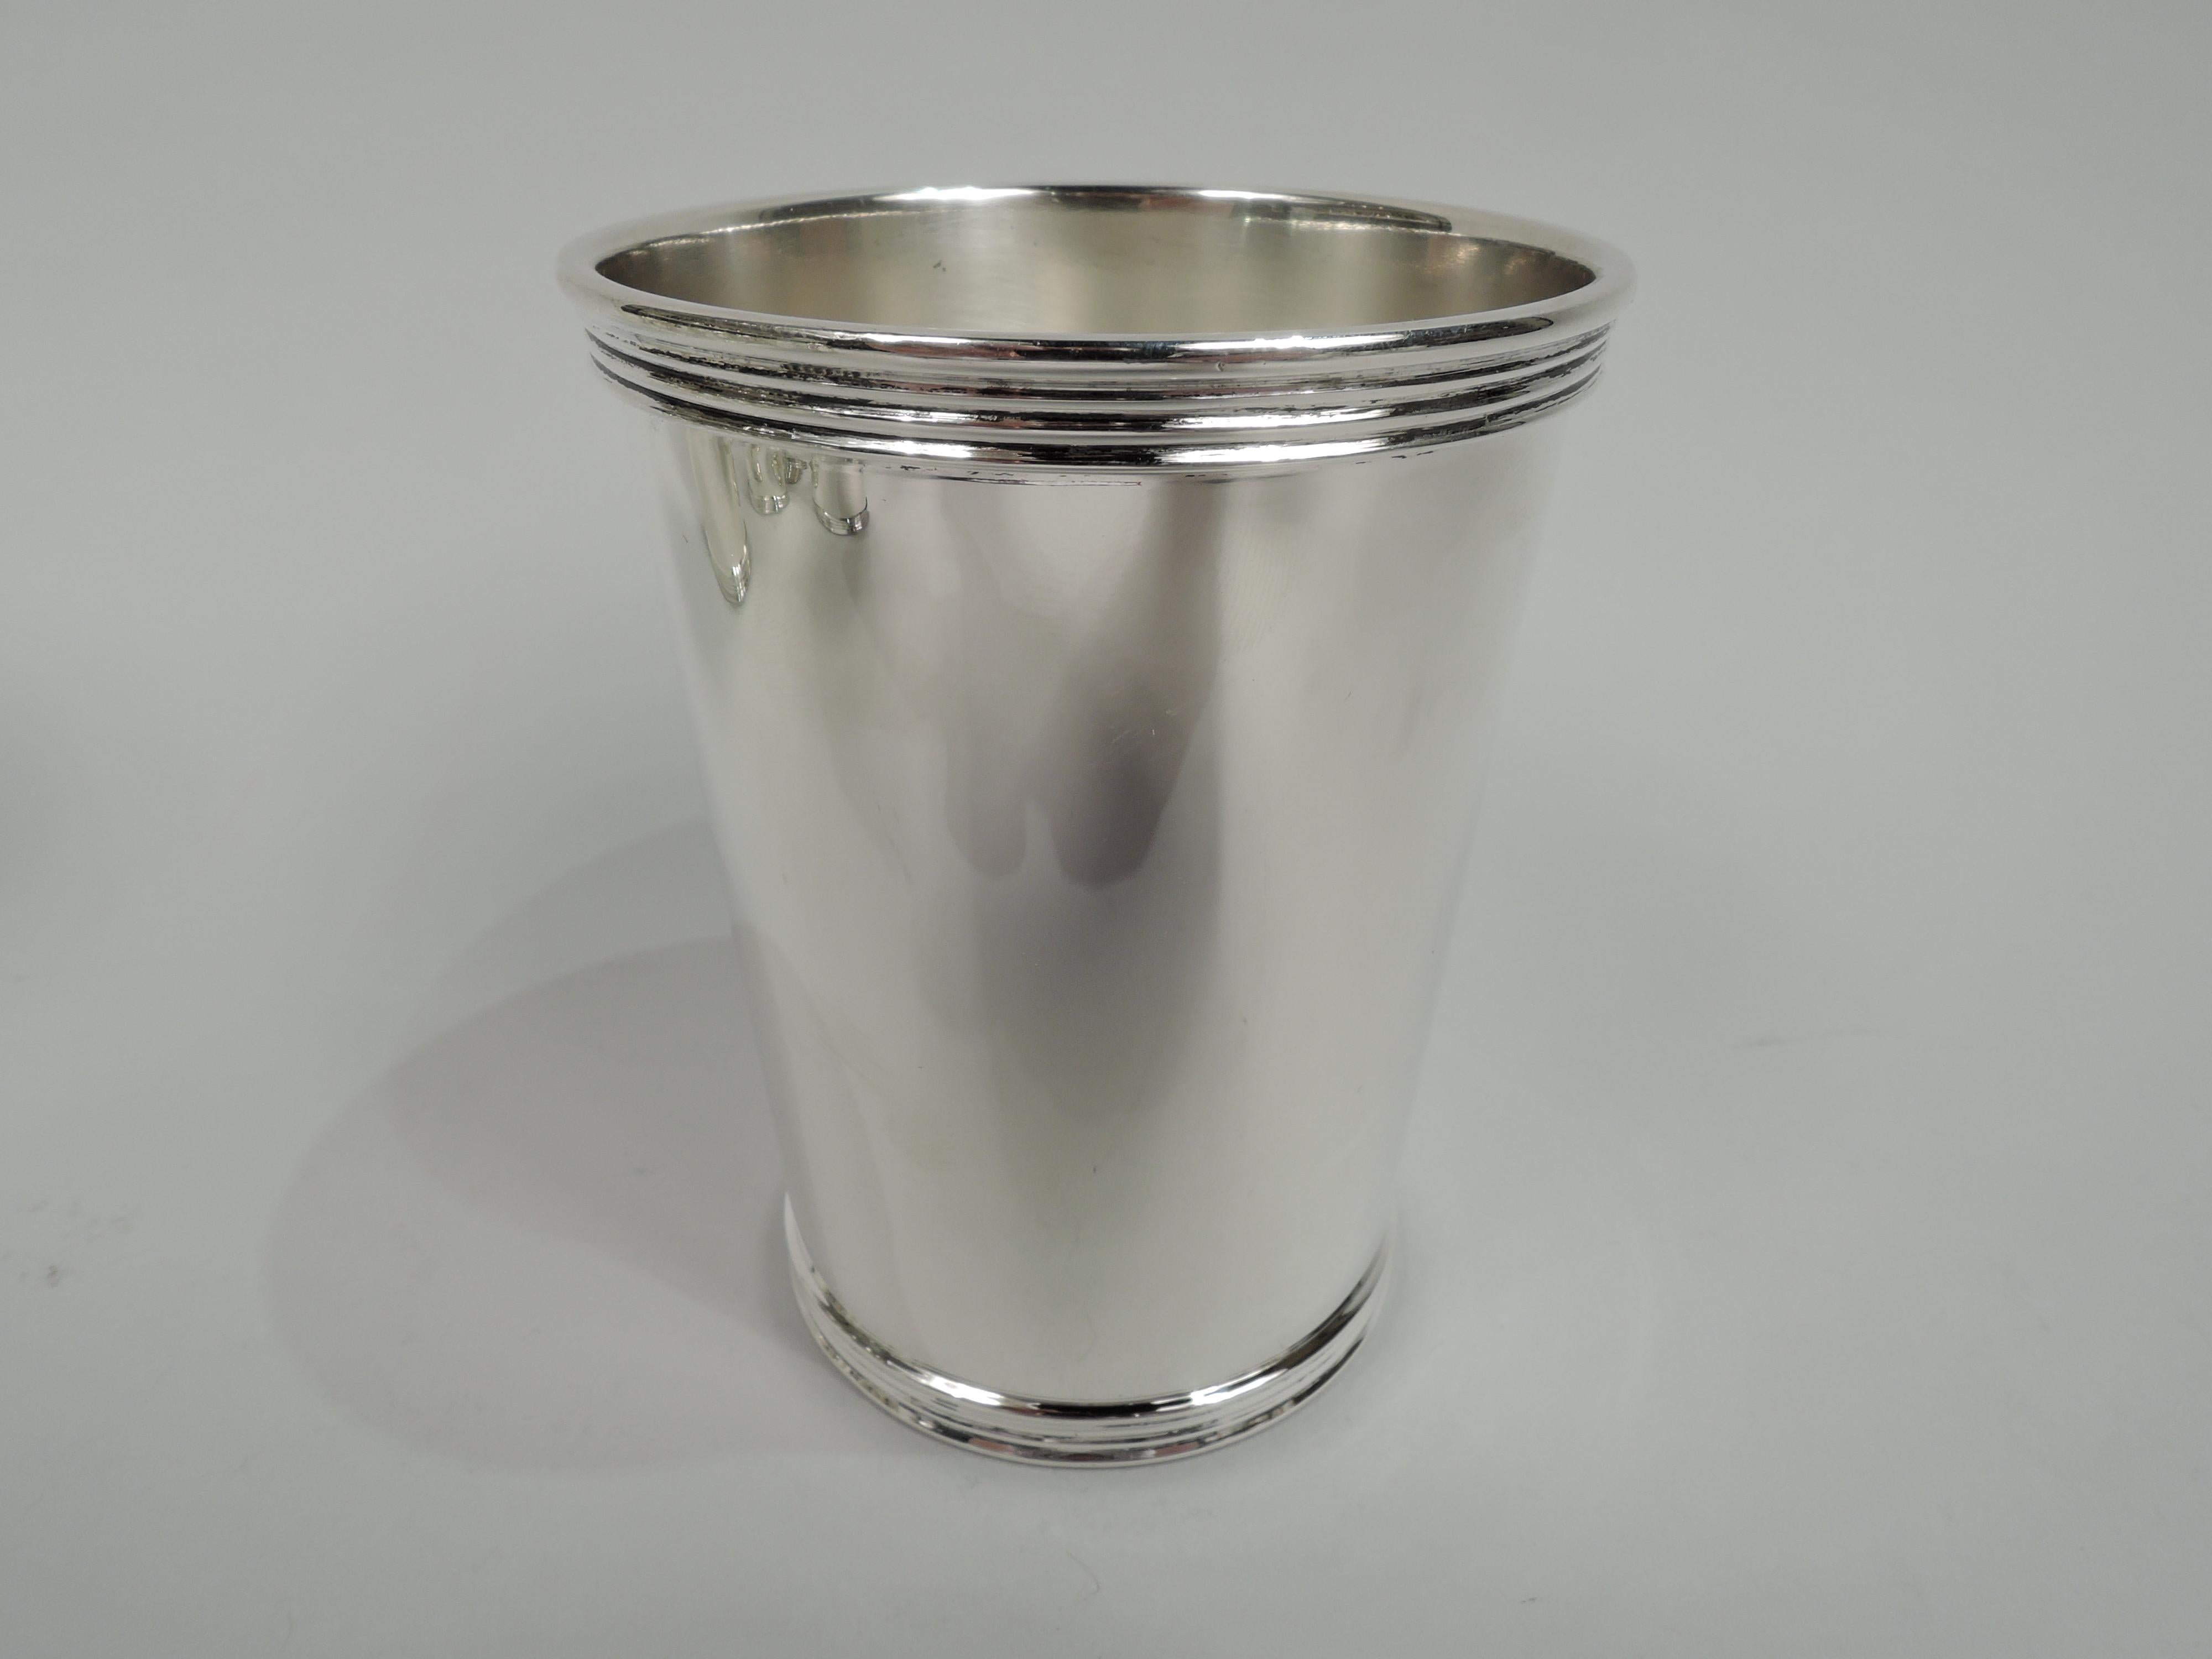 Set of 6 traditional sterling silver mint juleps. Made by International Silver Co. in Meriden, Conn. Each: Straight and tapering sides, and reeded rim and base. Fully marked including maker’s stamp and no. P699. Total weight: 24 troy ounces.